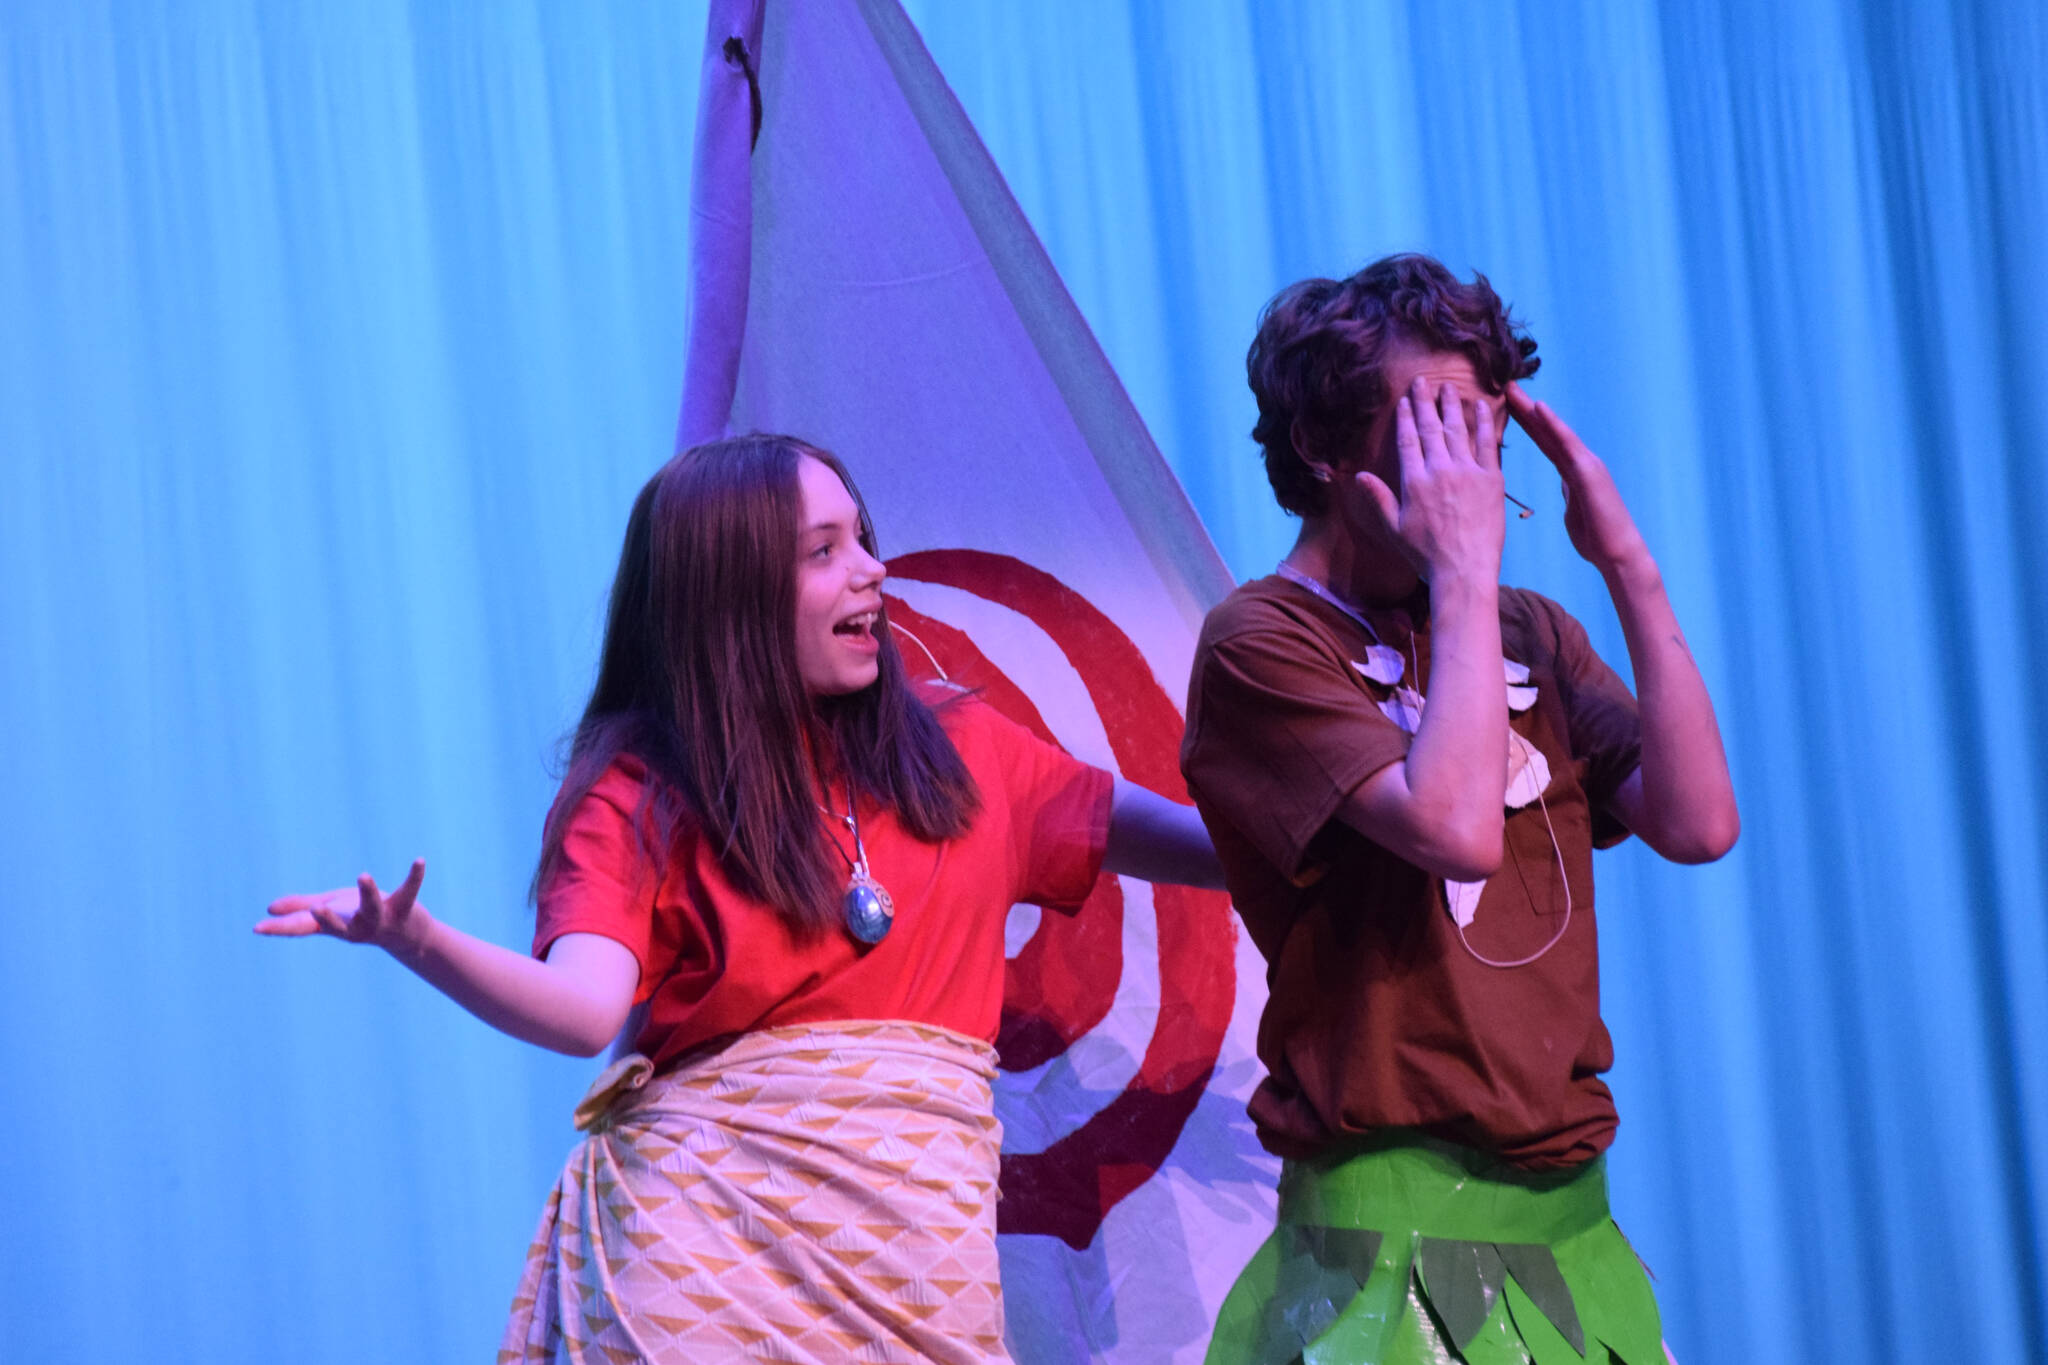 Mylee Yeoman, left, and Cooper Tallent-Darling perform “Moana” during a dress rehearsal at the Renee C. Henderson Auditorium in Kenai, Alaska, on Wednesday, April 27, 2022. (Camille Botello/Peninsula Clarion)